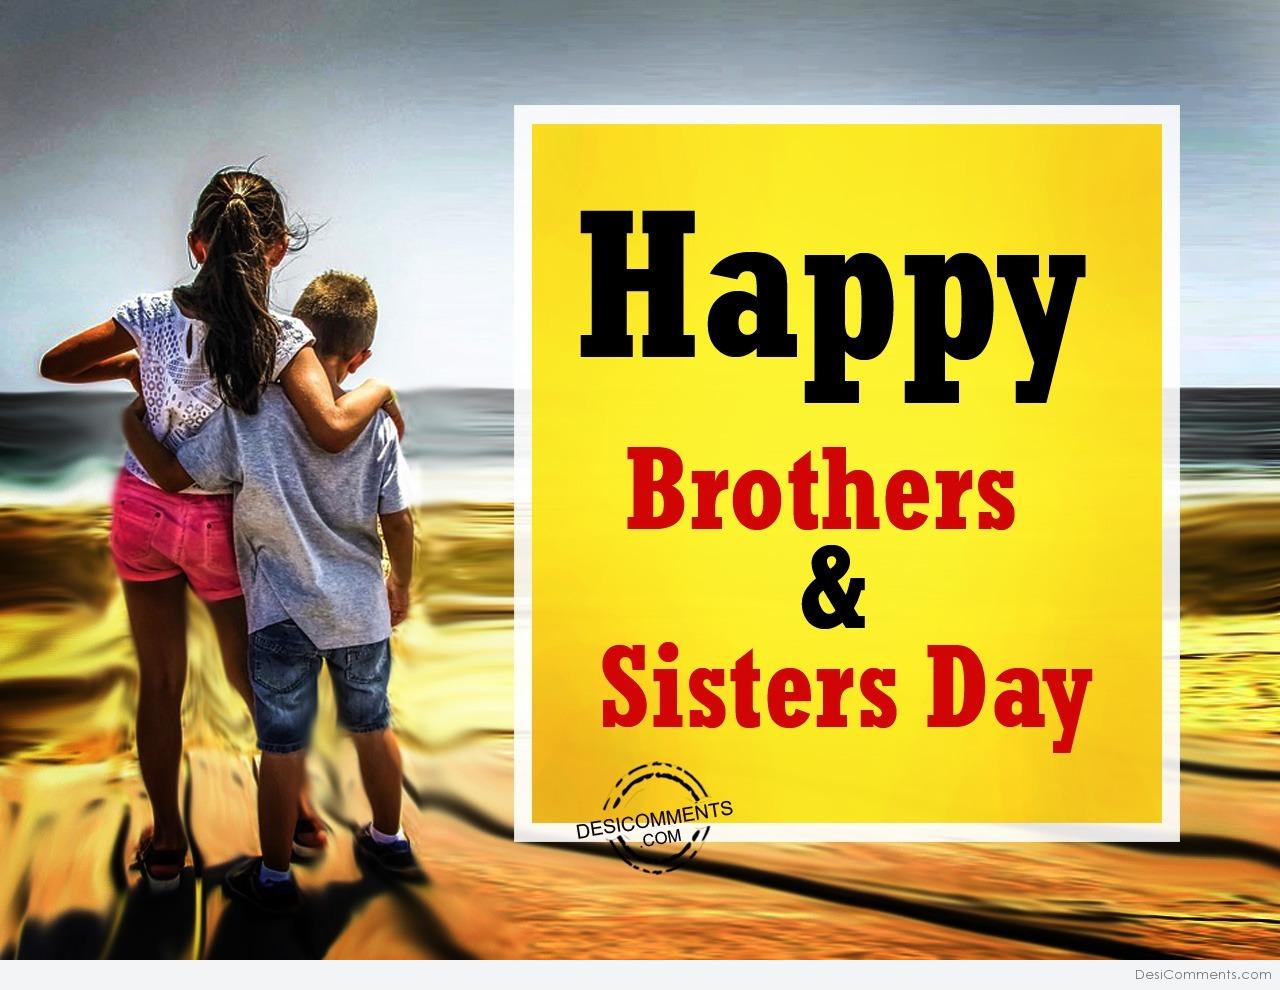 Happy brothers & Sisters Day,May 2